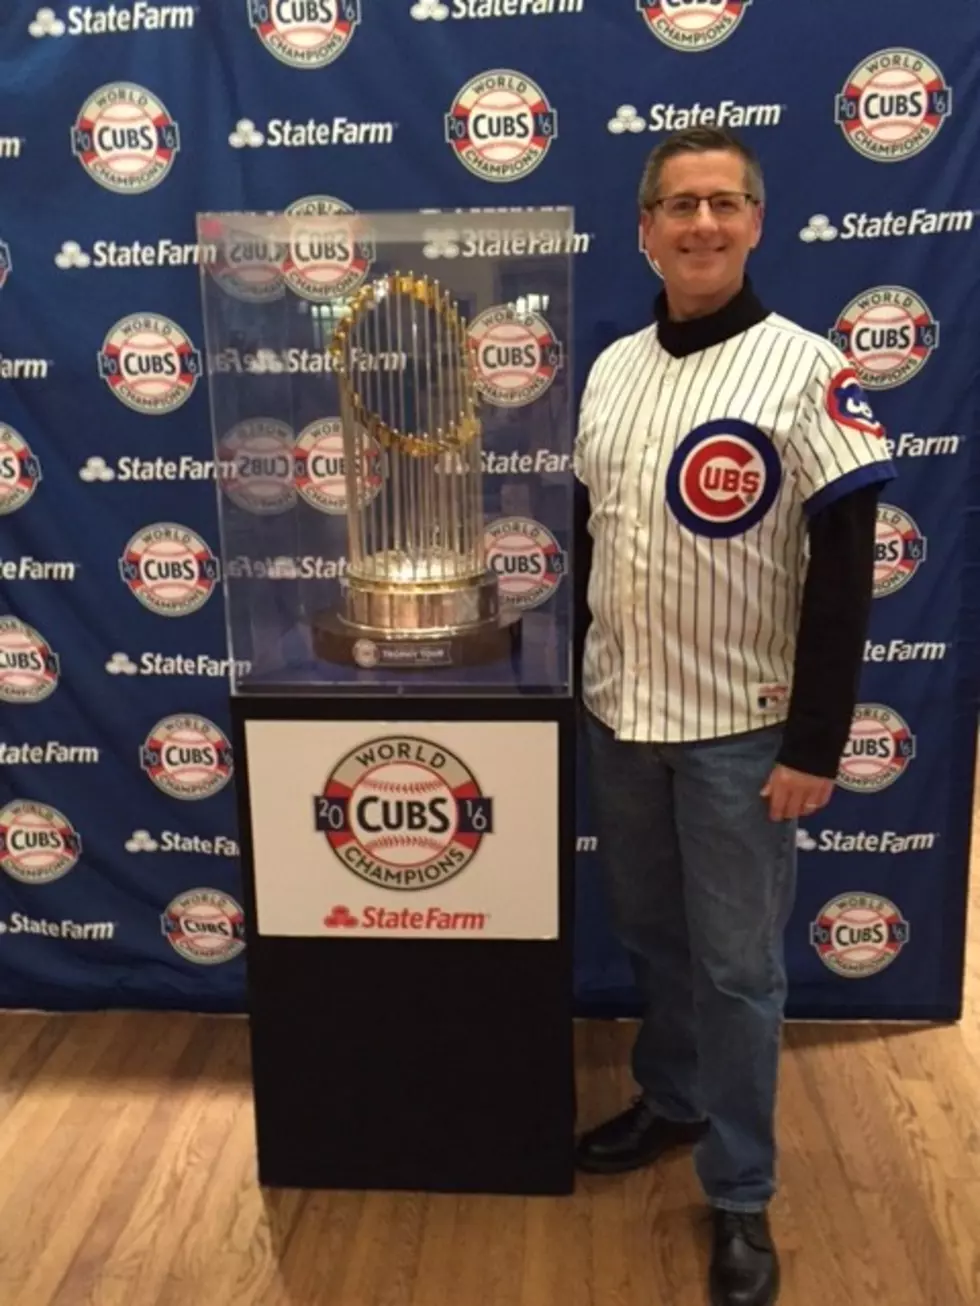 Hundreds Show Up to See Cubs’ Series Trophy